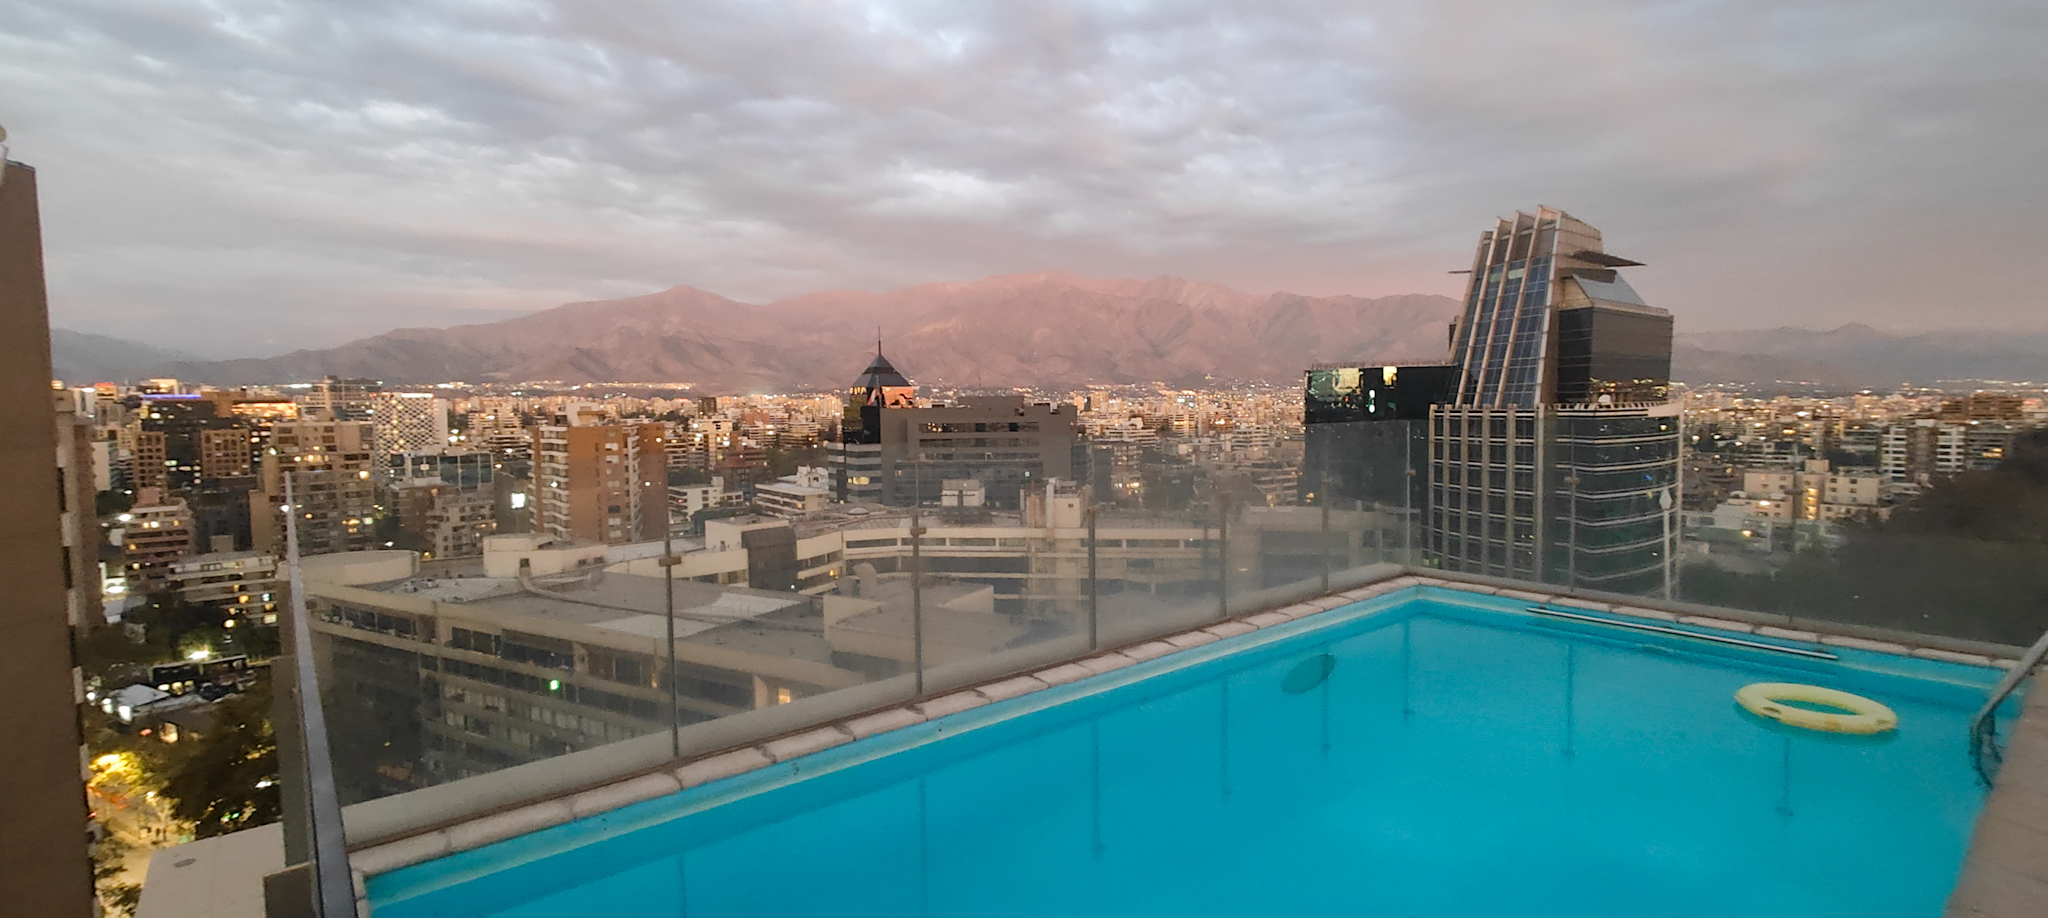 Rooftop pool with backdrop of Santiago skyline at dusk